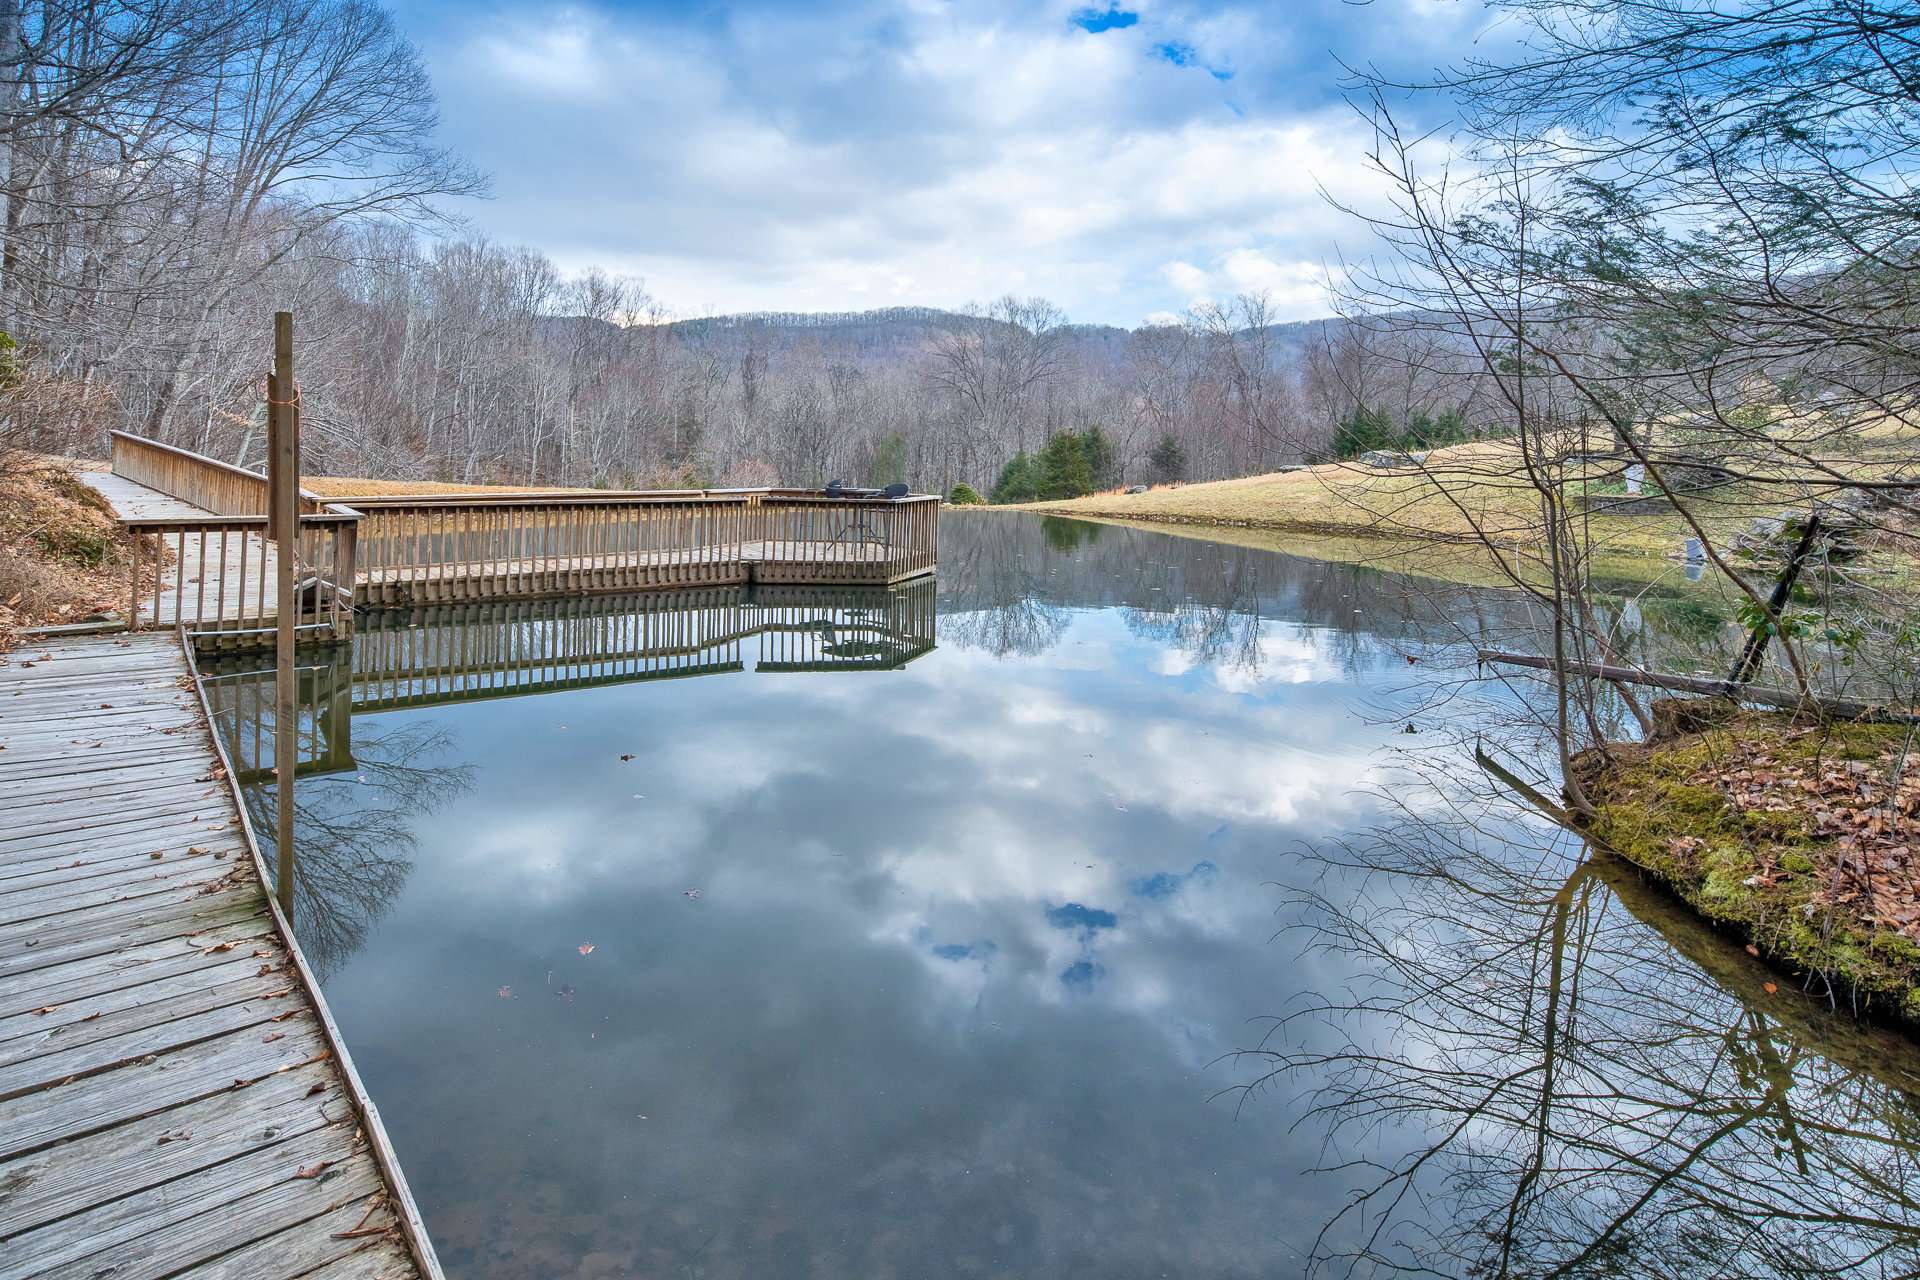 Endless hours of enjoyment are available fishing, floating, or simply relaxing by the pond.